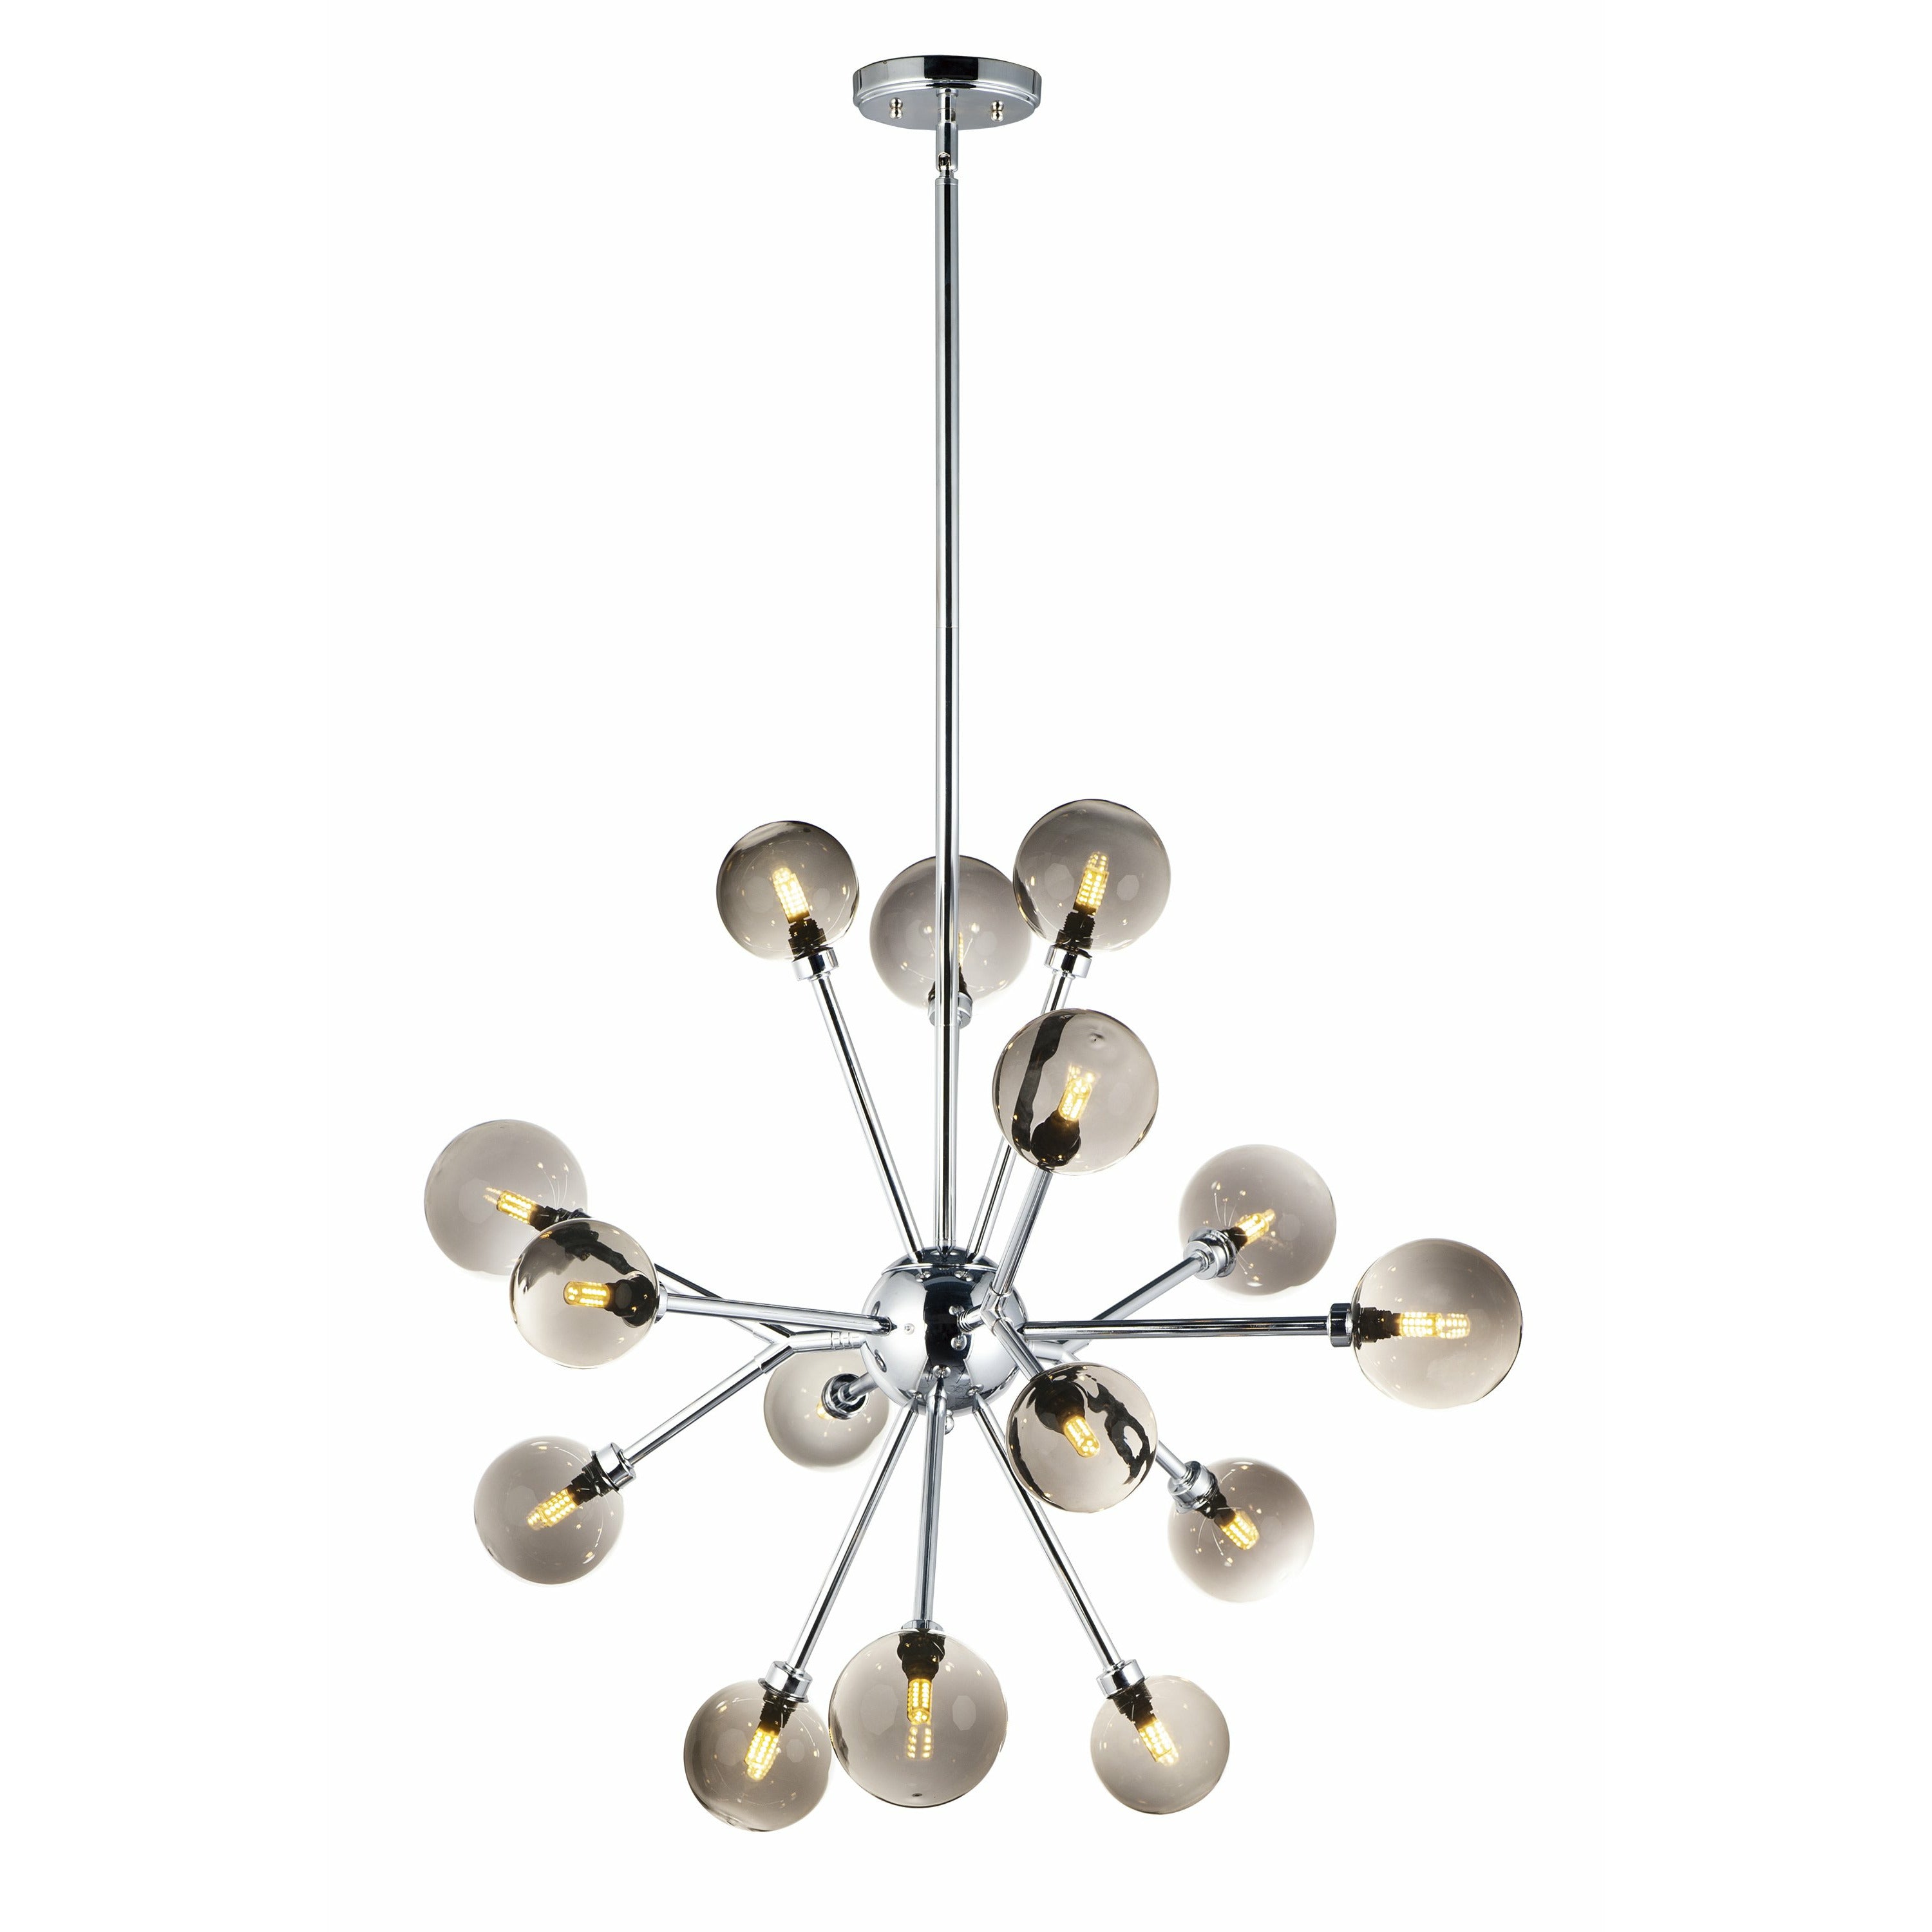 Asteroid Chandelier Polished Chrome